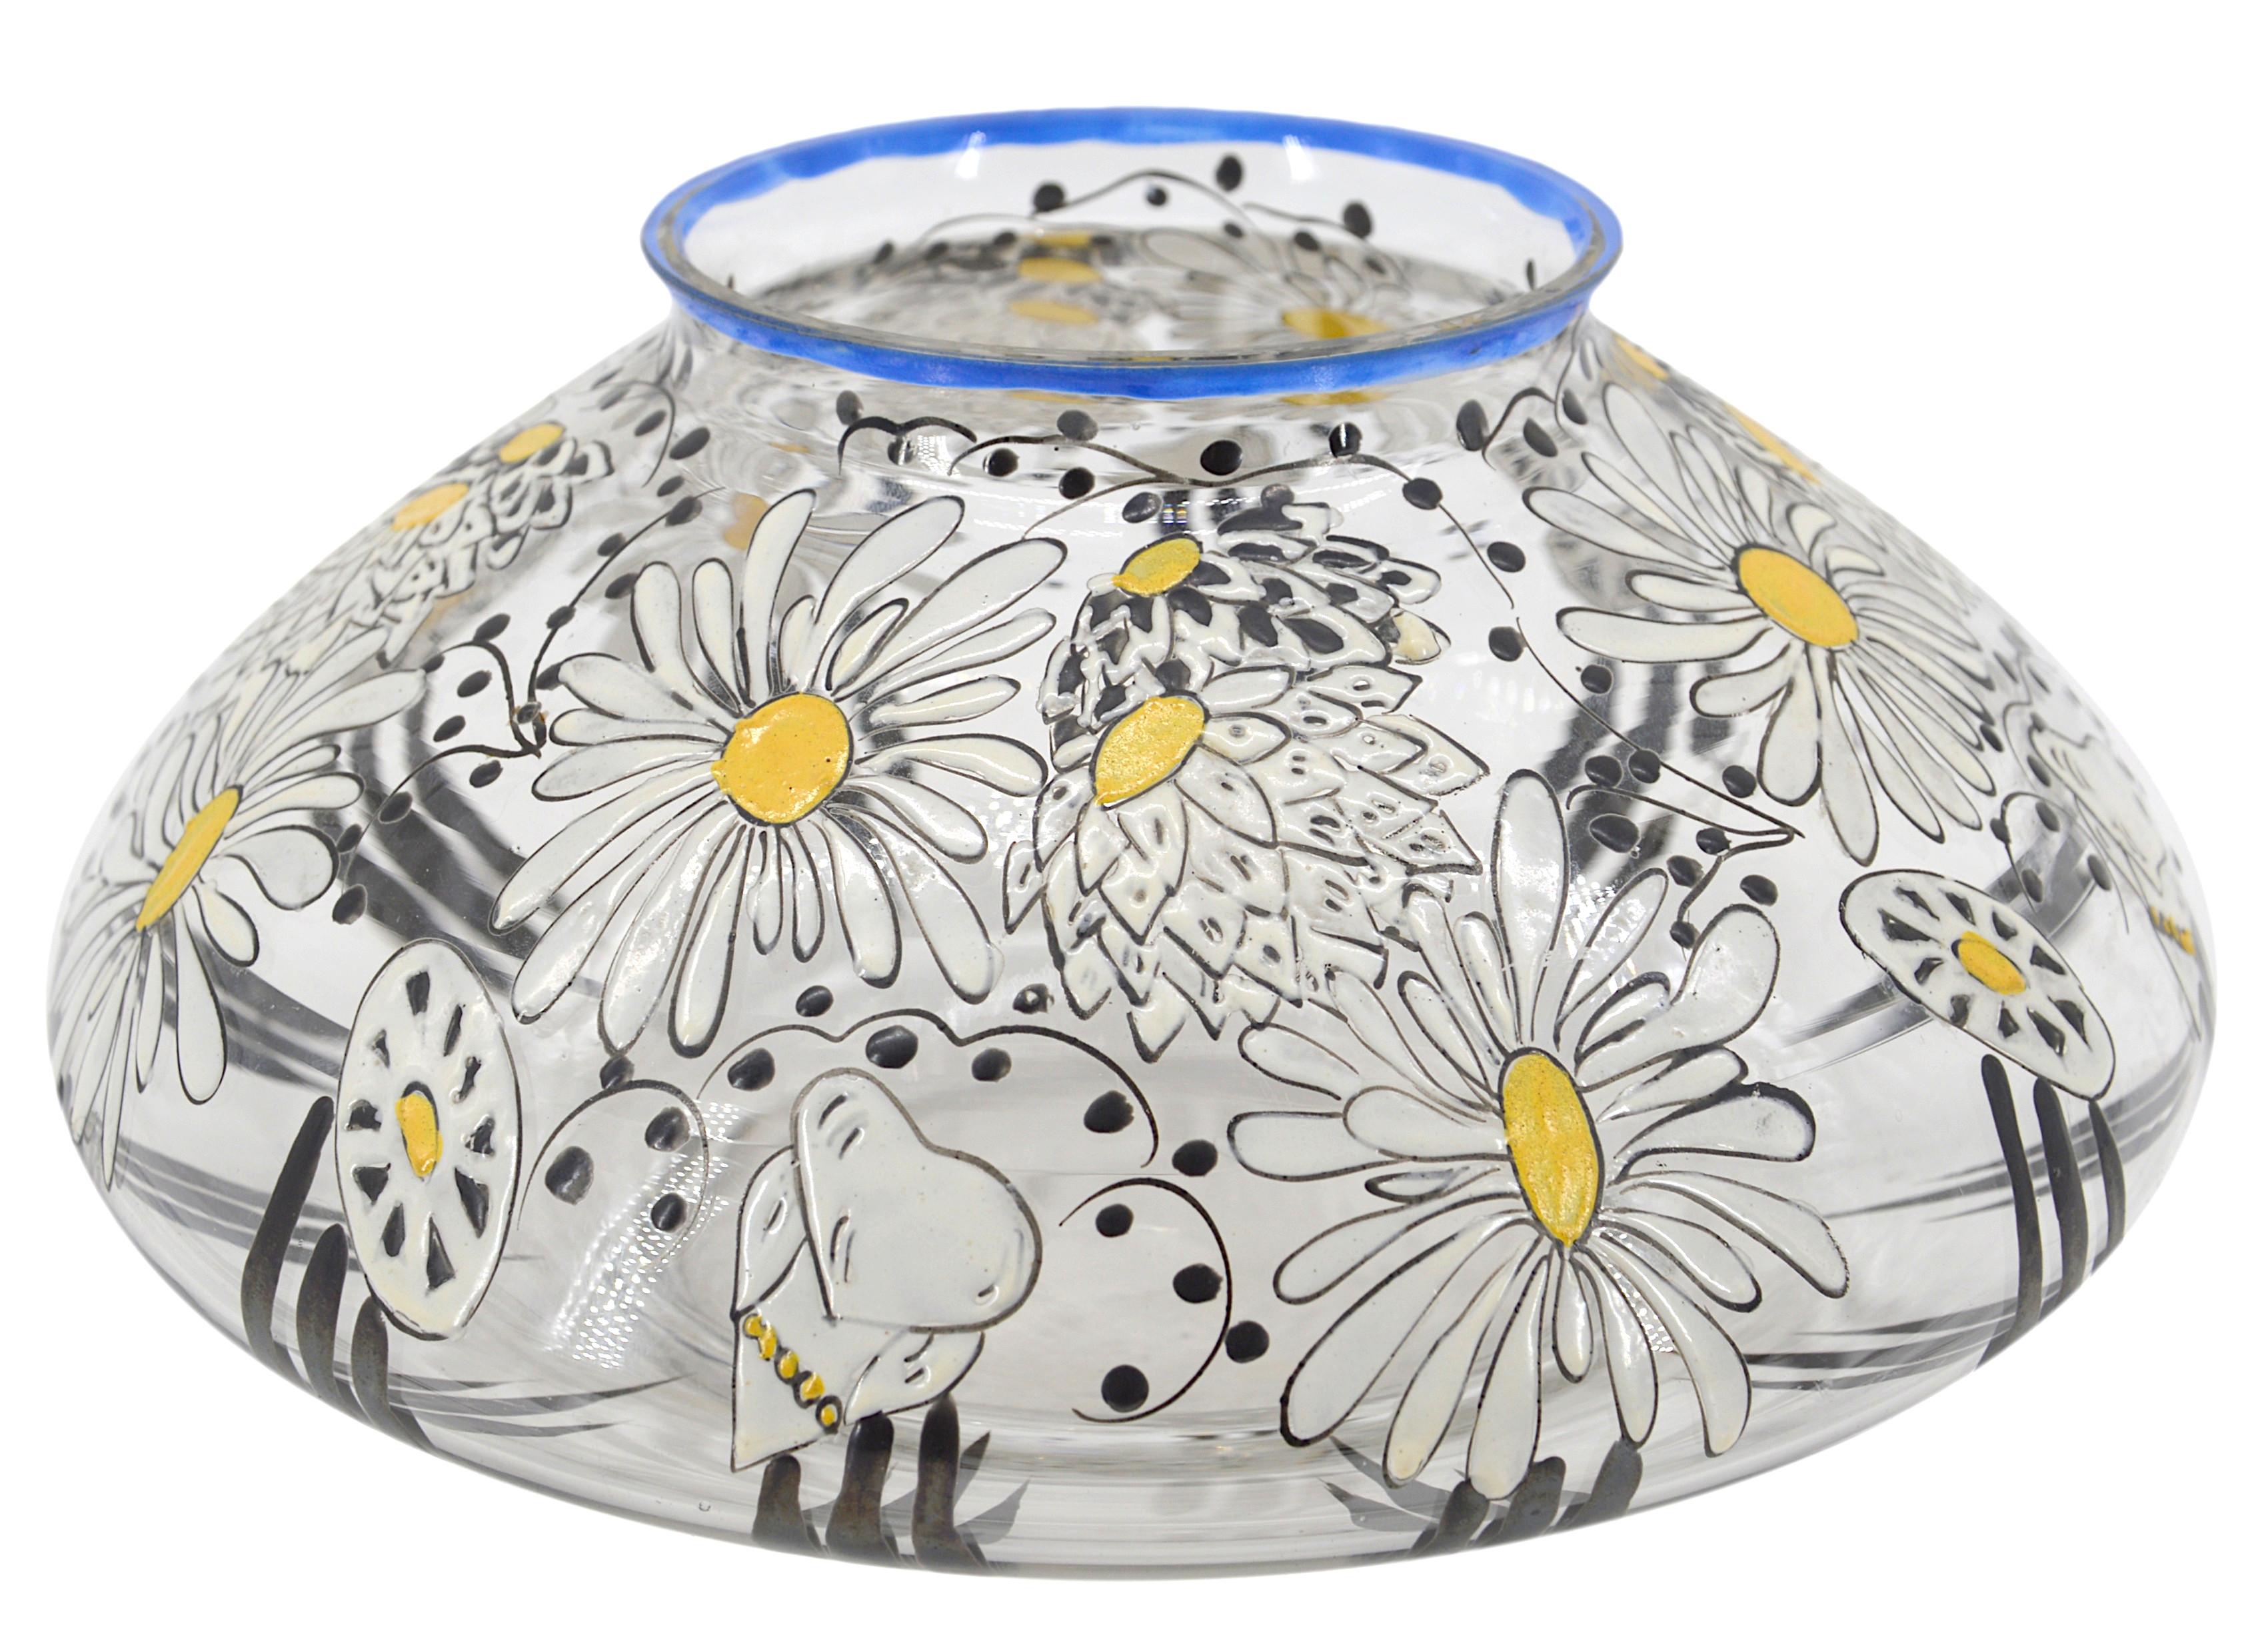 Enameled art glass vase by Adrien Mazoyer (1887-1950), Moulins, France, 1920s. Richly enameled large daisies. Measures: height : 4.7